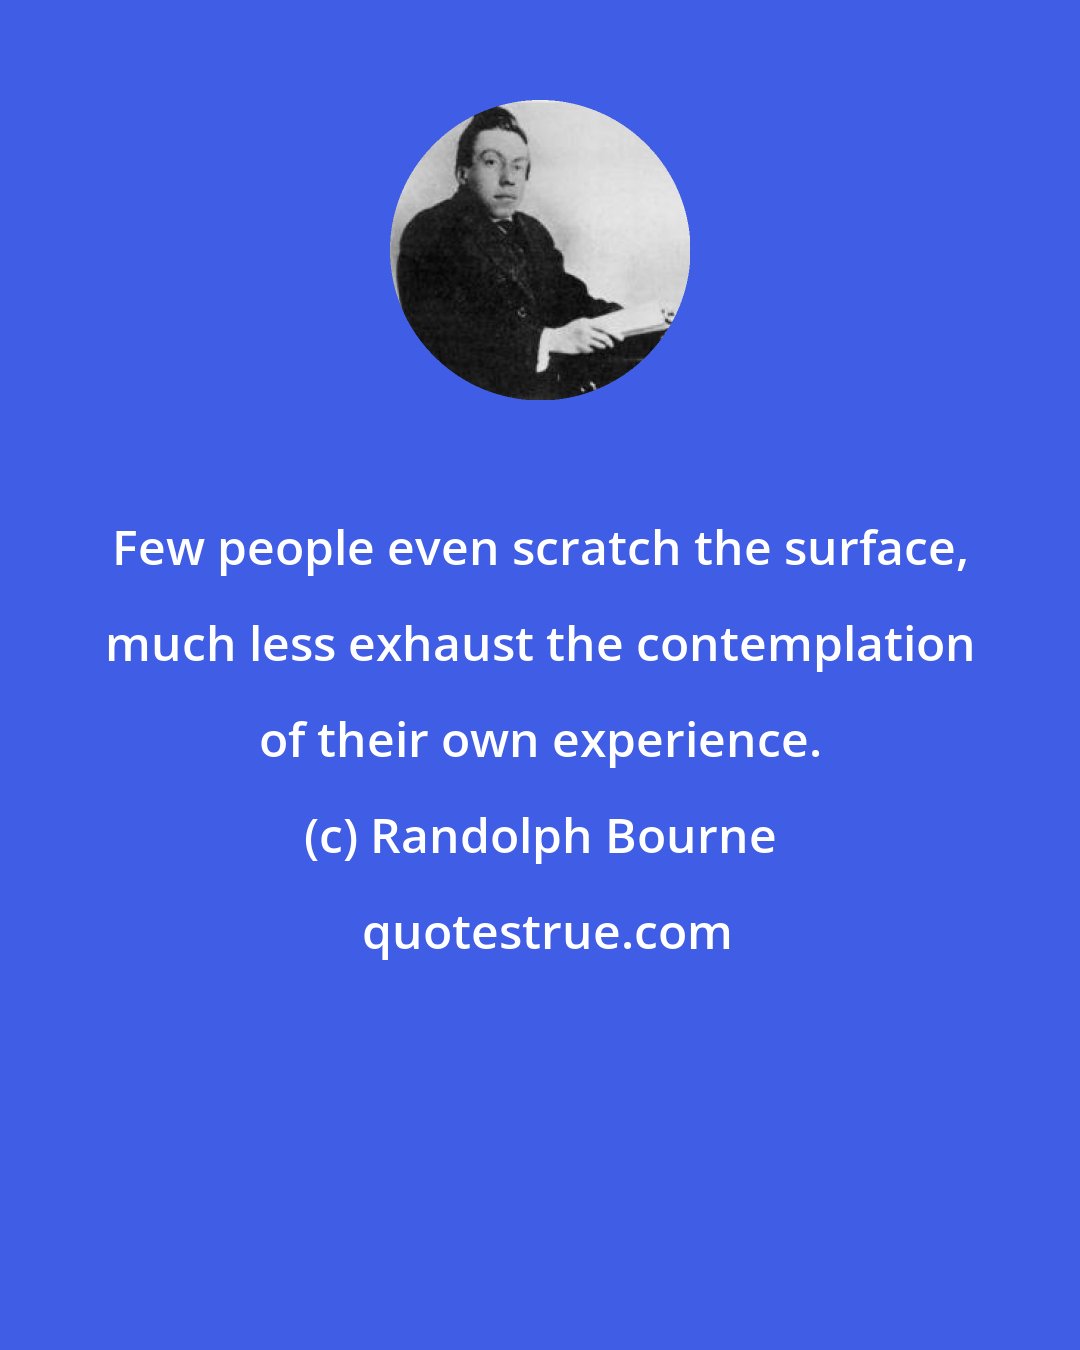 Randolph Bourne: Few people even scratch the surface, much less exhaust the contemplation of their own experience.